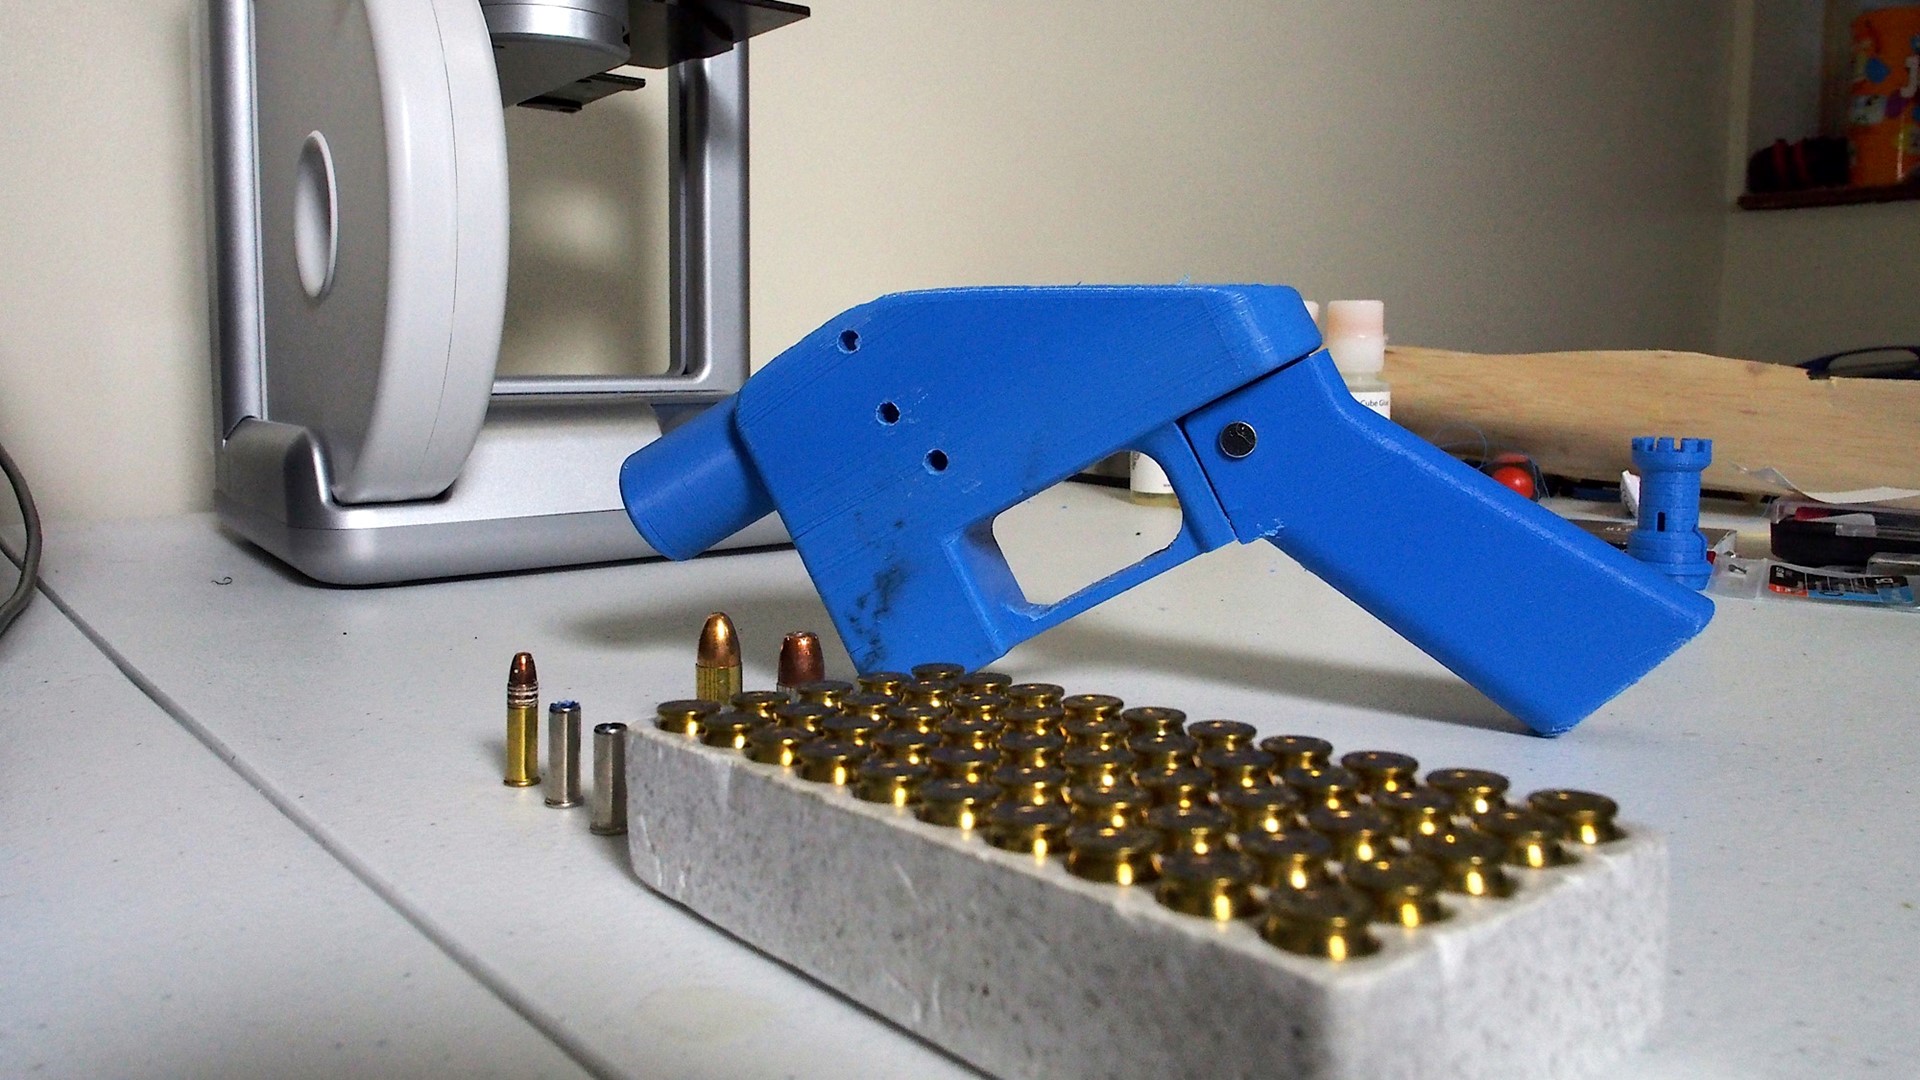 an-ar-15-made-at-home-with-3d-printing-the-downloadable-gun-becomes